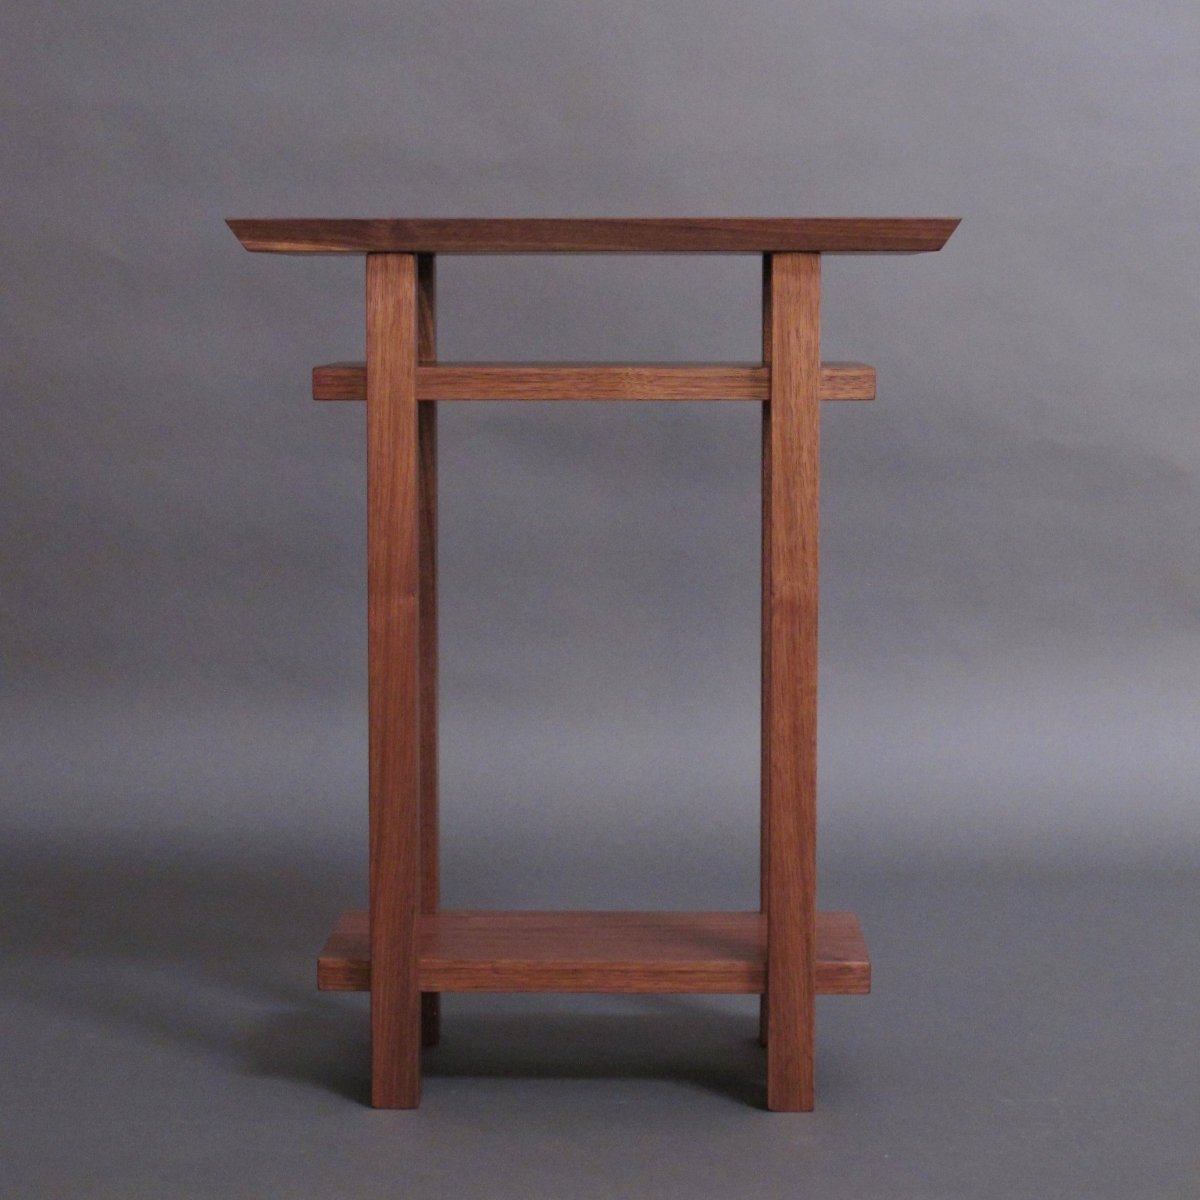 A small walnut end table with shelves hand-crafted by furniture artists at Mokuzai Furniture.  This small end table adds beauty and function to even the smallest spaces.